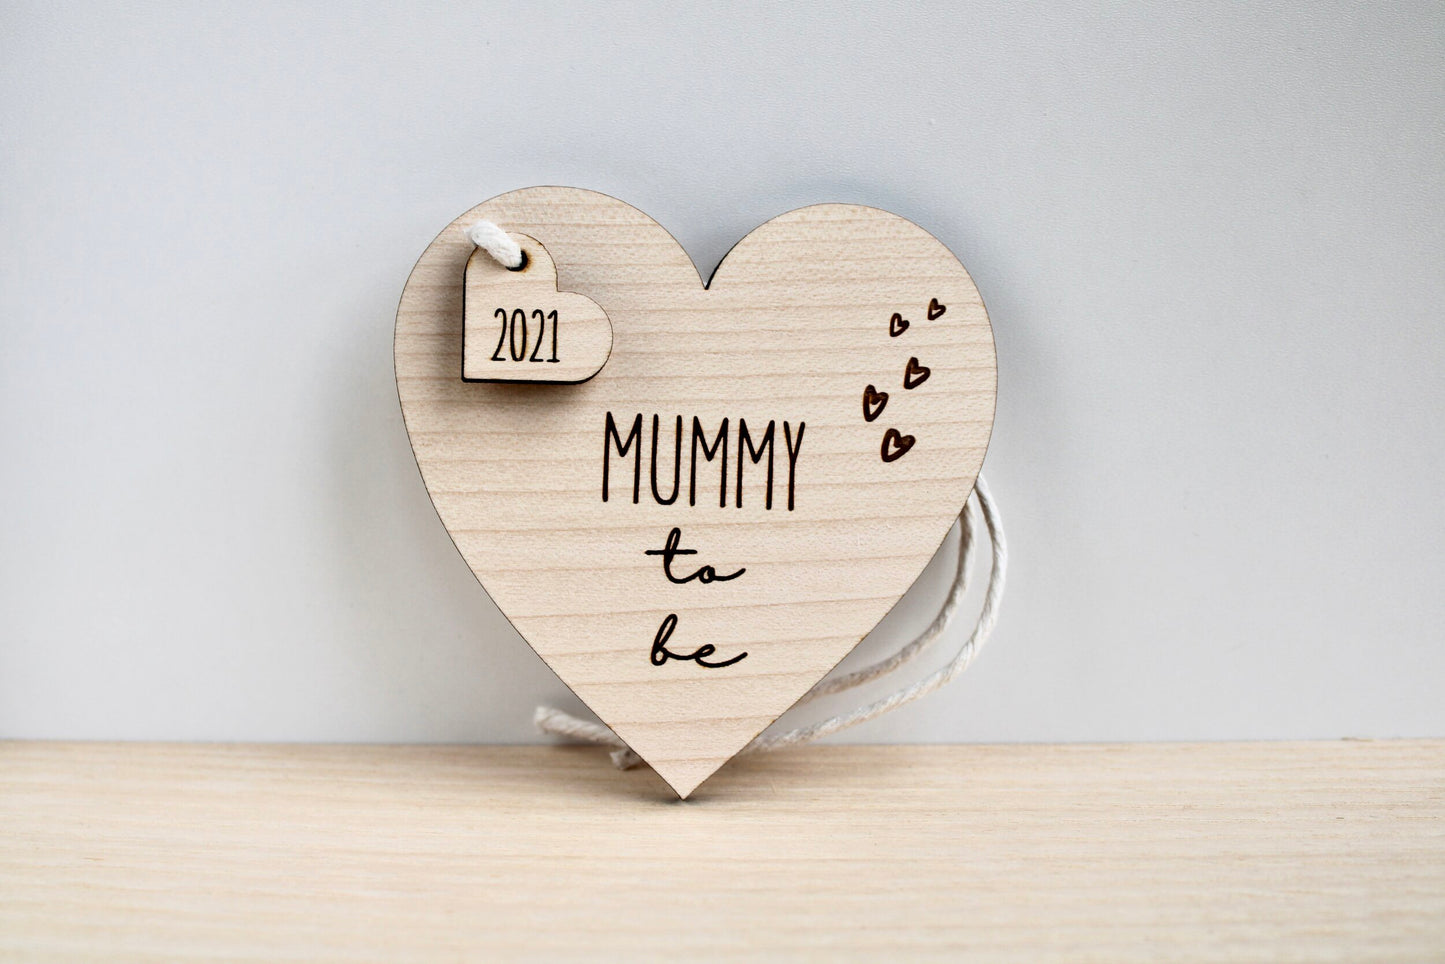 Mummy to be gift with heart design